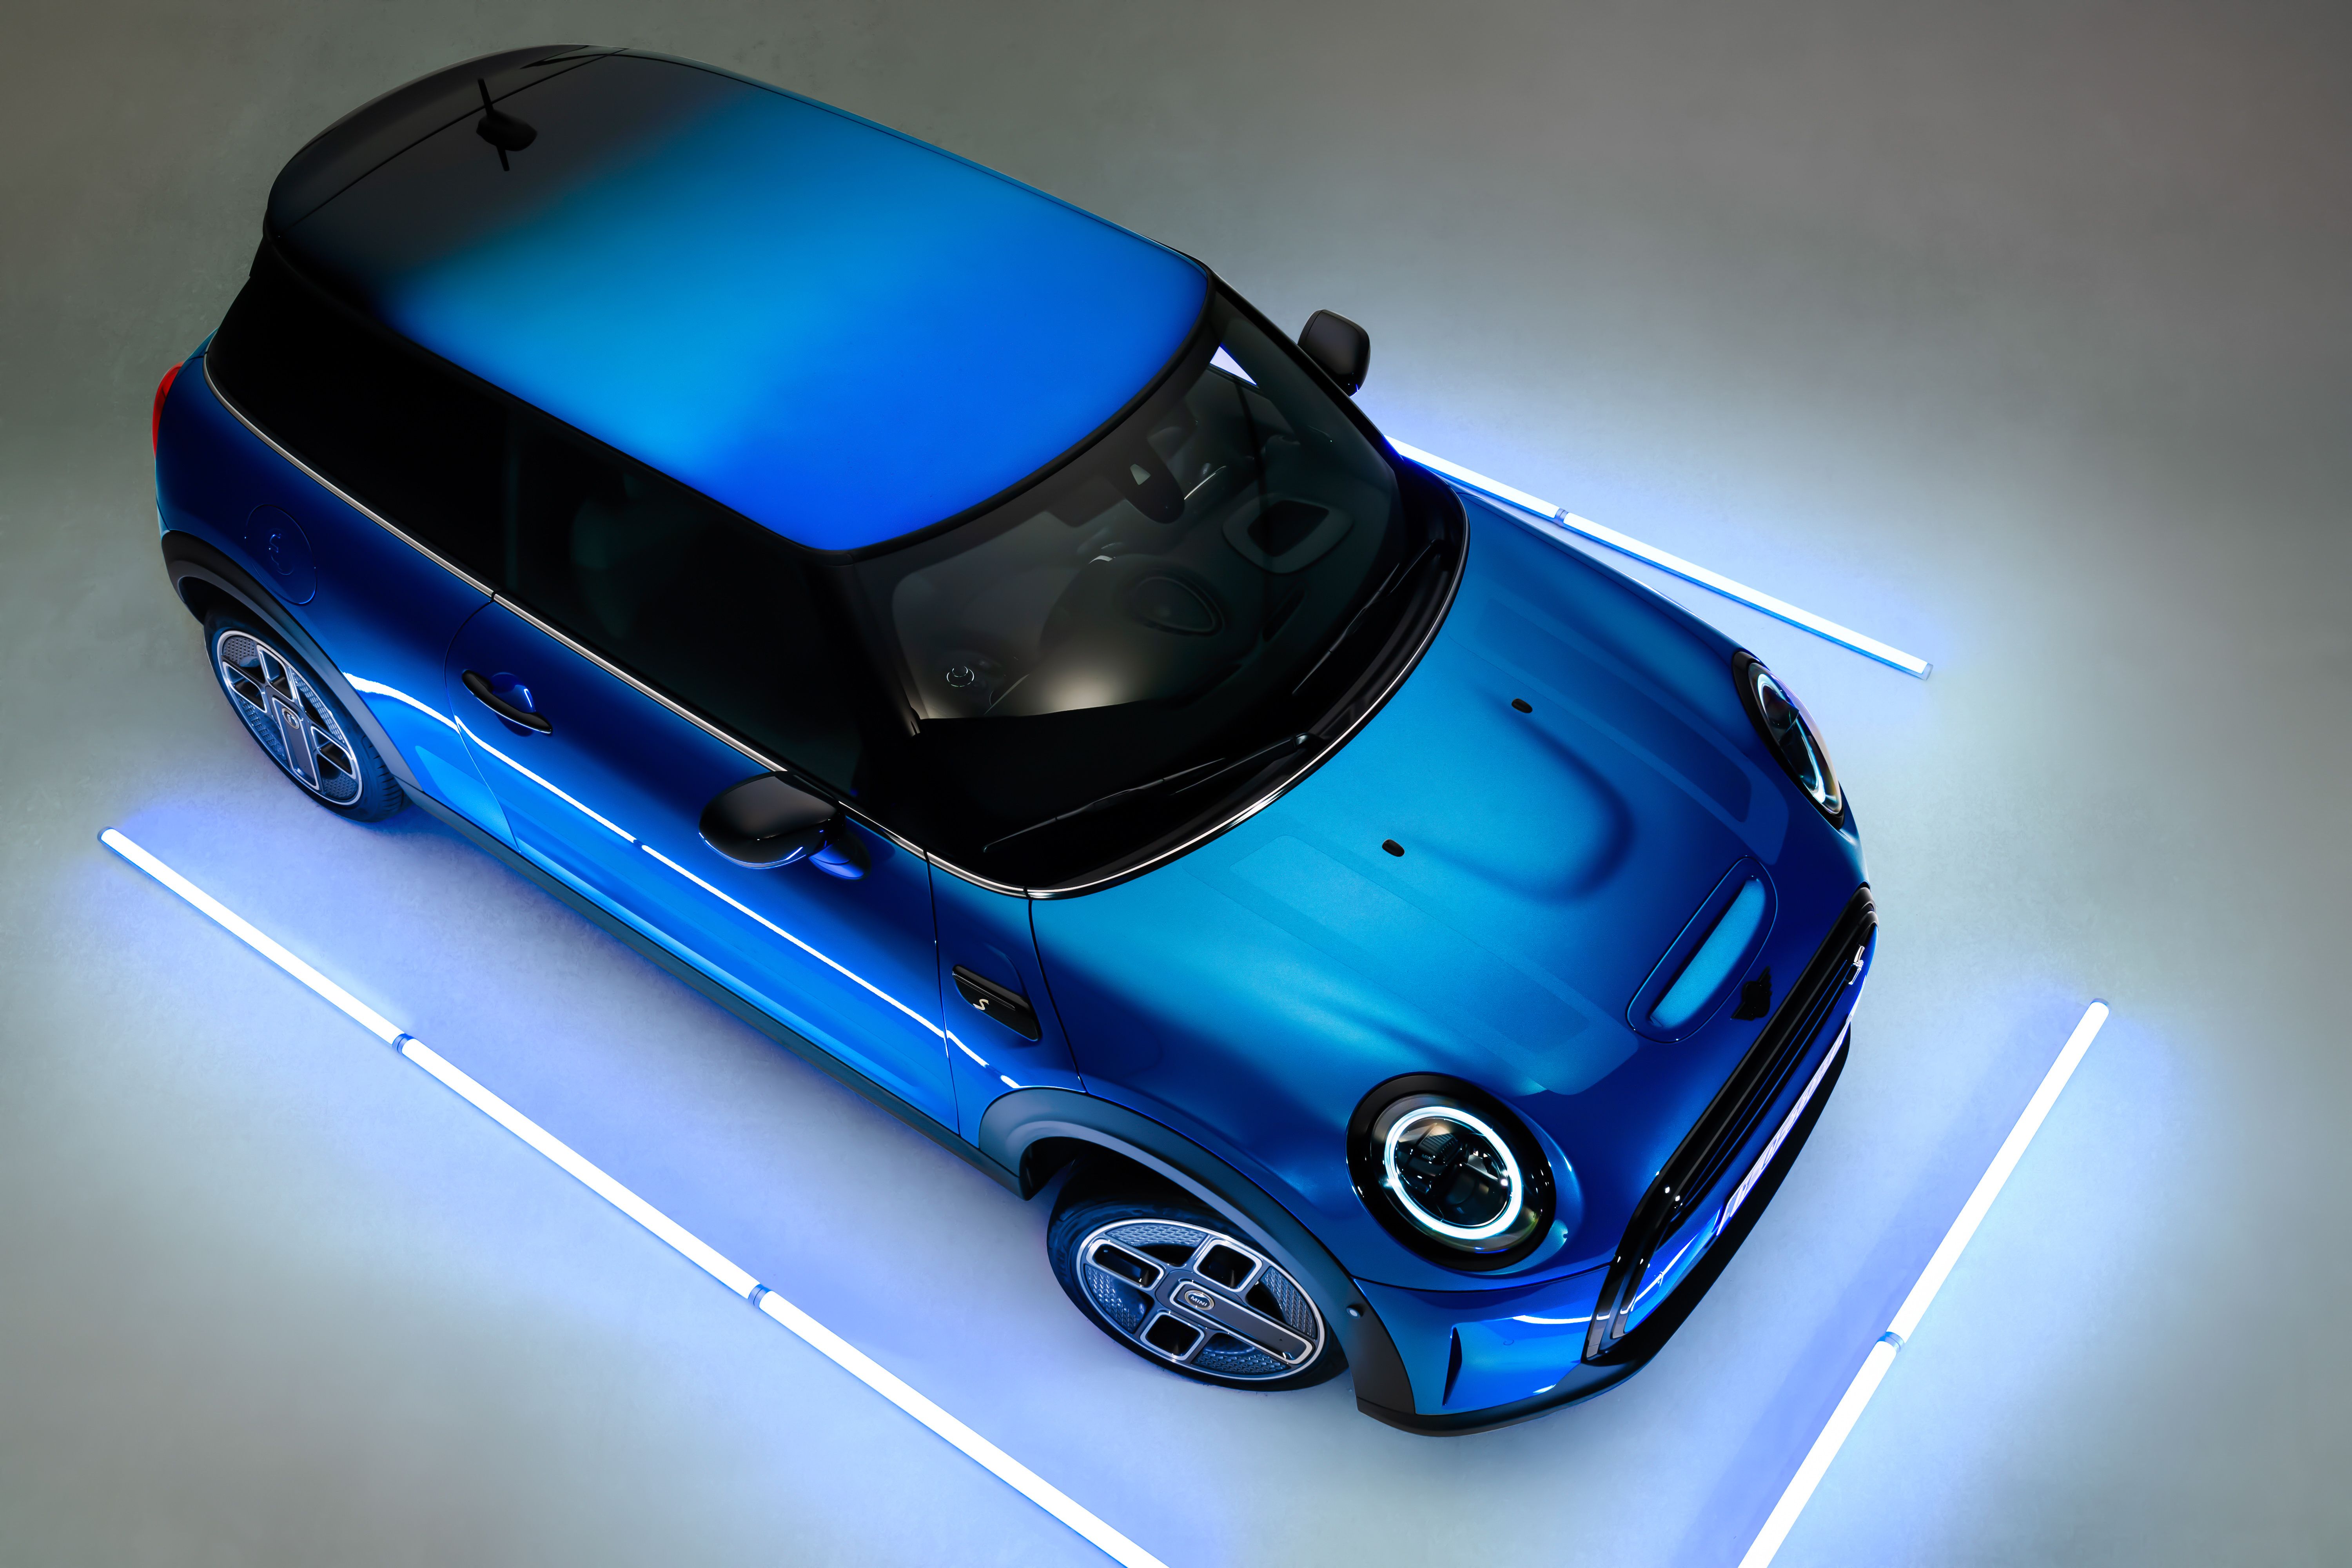 2022 Mini Cooper Electric Review, Pricing, and Specs